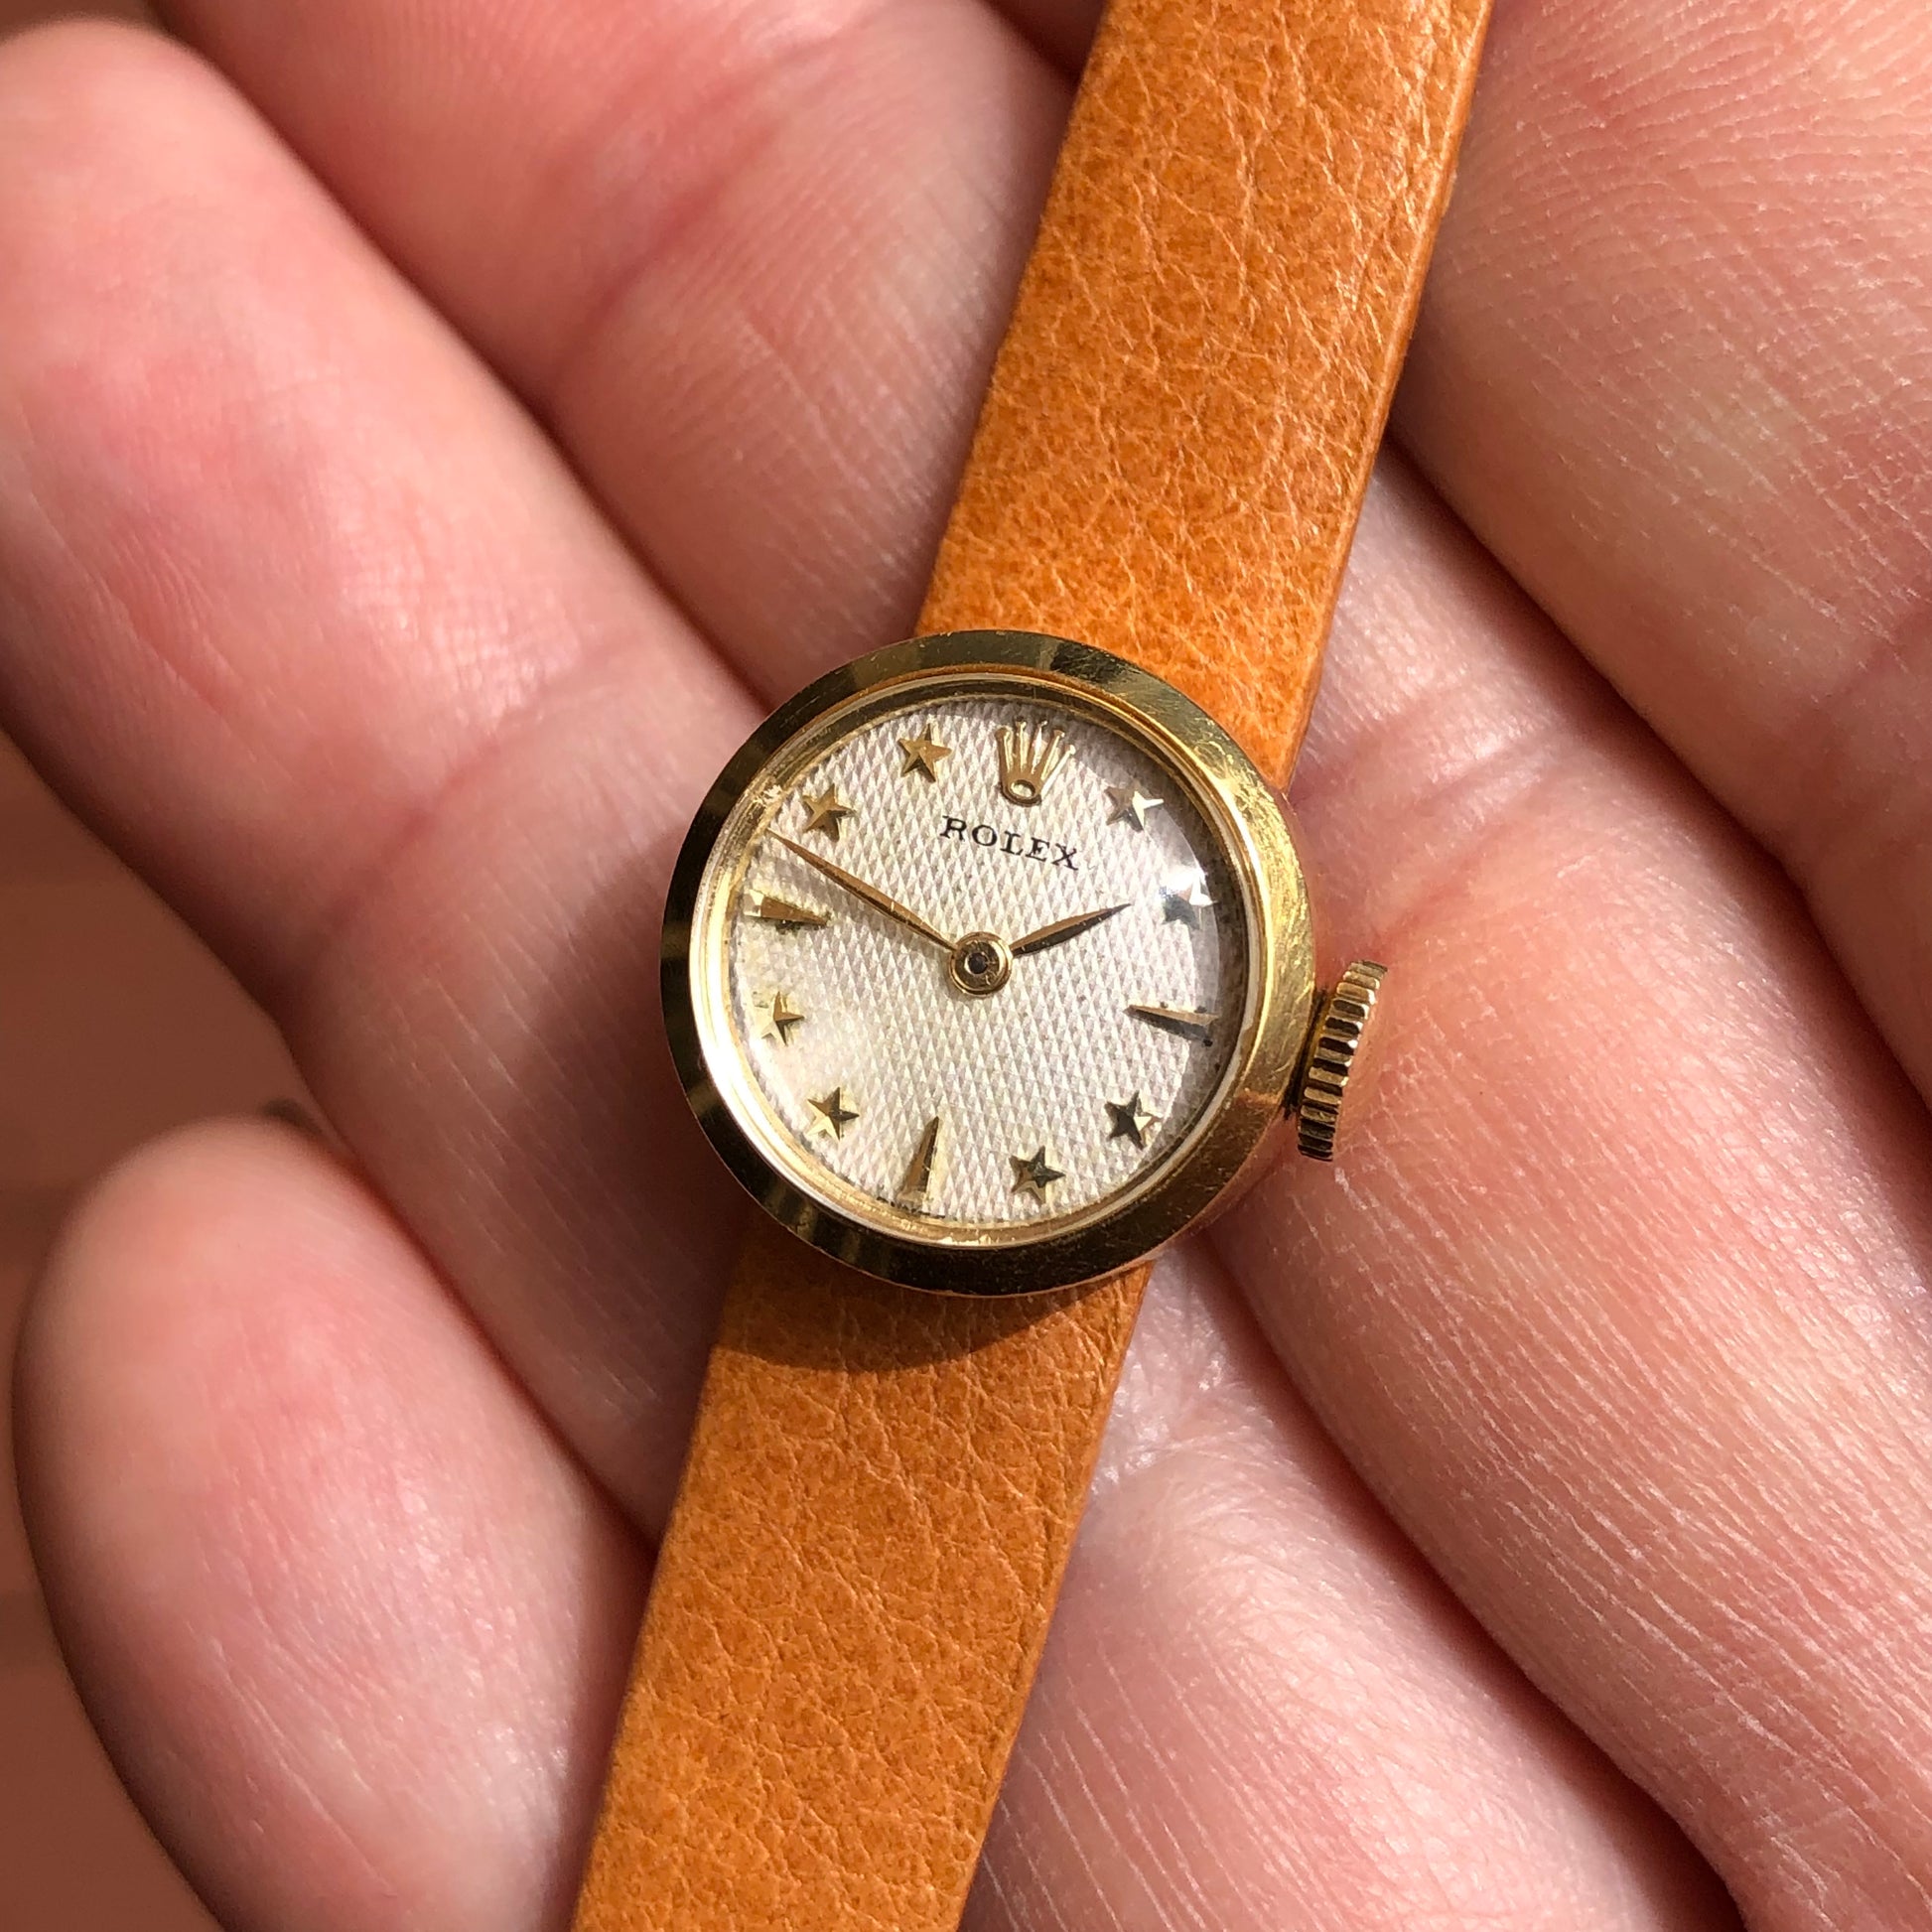 1950s Rolex Precision 00008 White Waffle Star Dial 18K Yellow Gold Cocktail Dress Wristwatch - Hashtag Watch Company